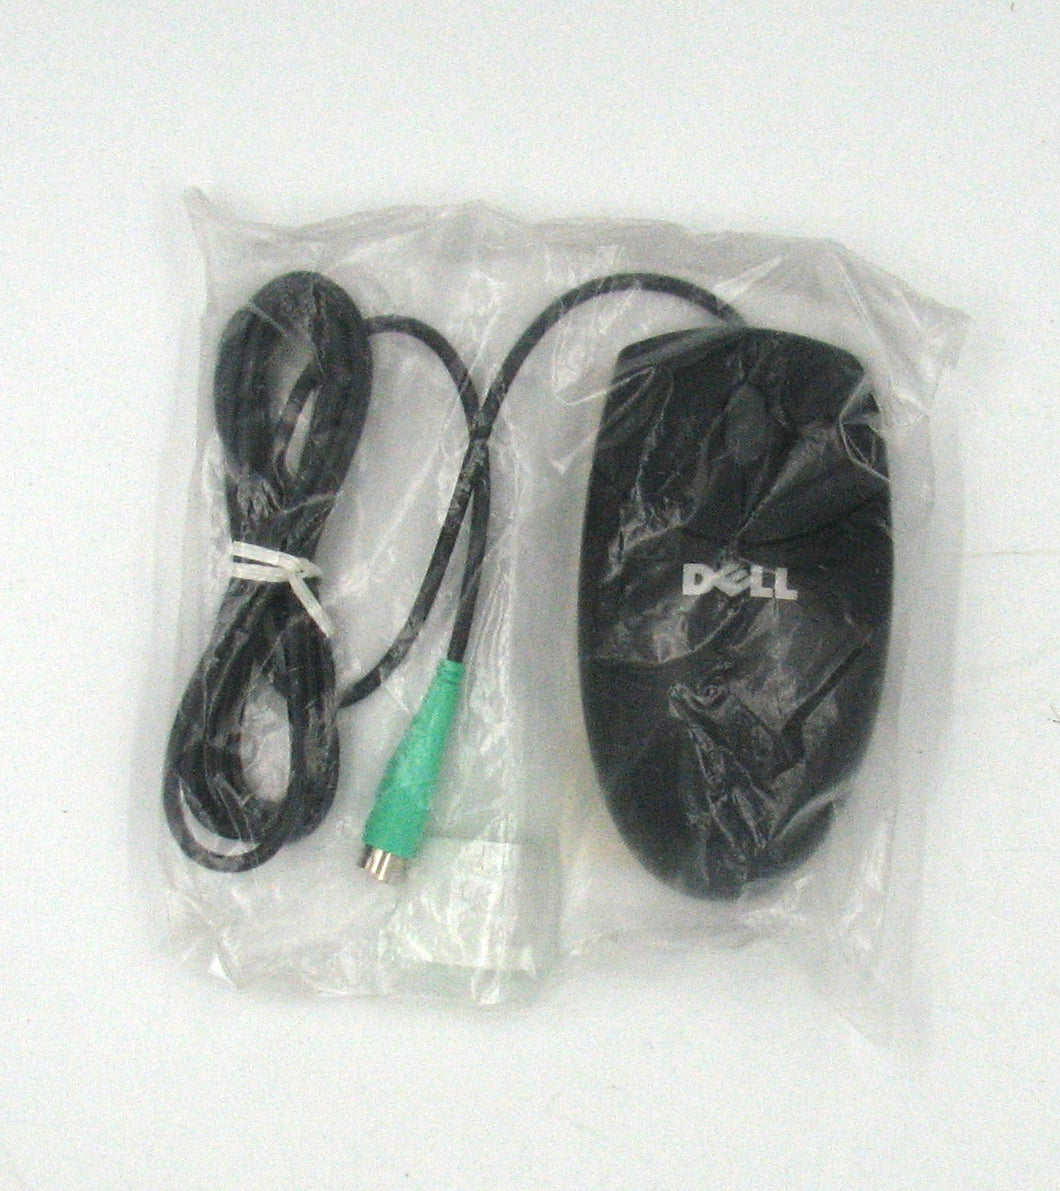 Dell Scroll Wheel Ball Mouse - PS/2 interface